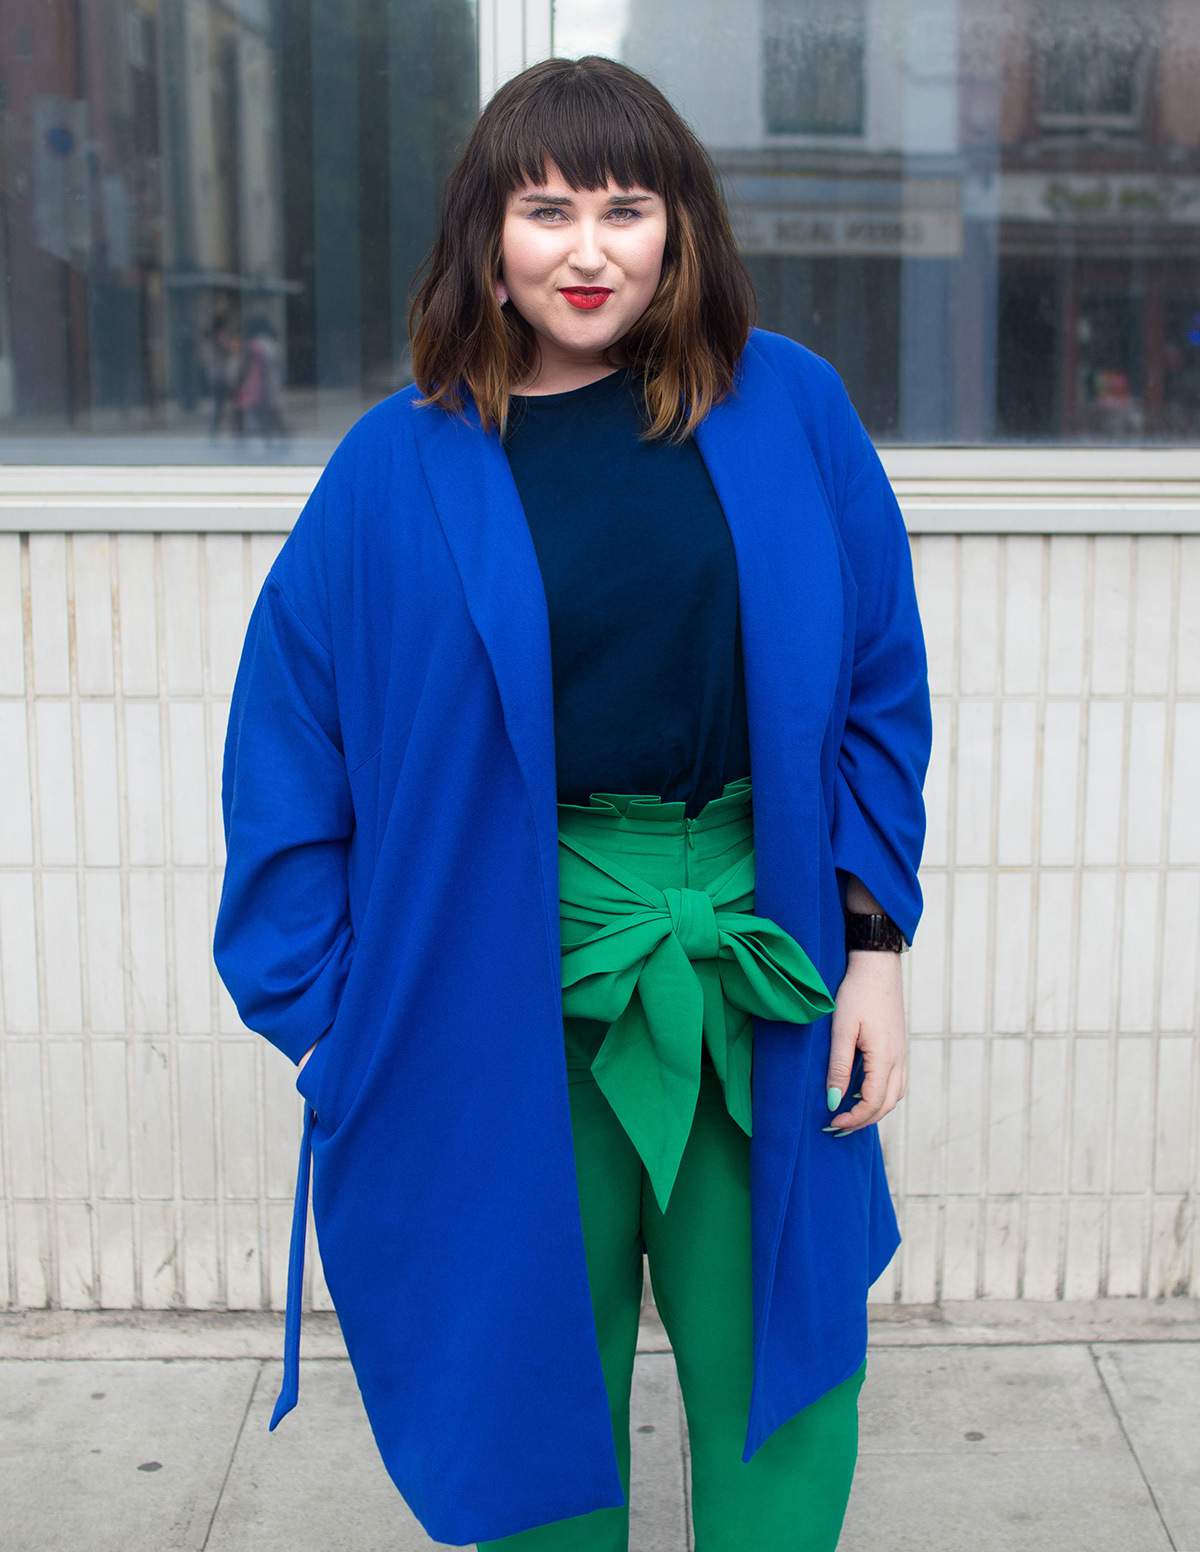 Arched Eyebrow x navabi collection